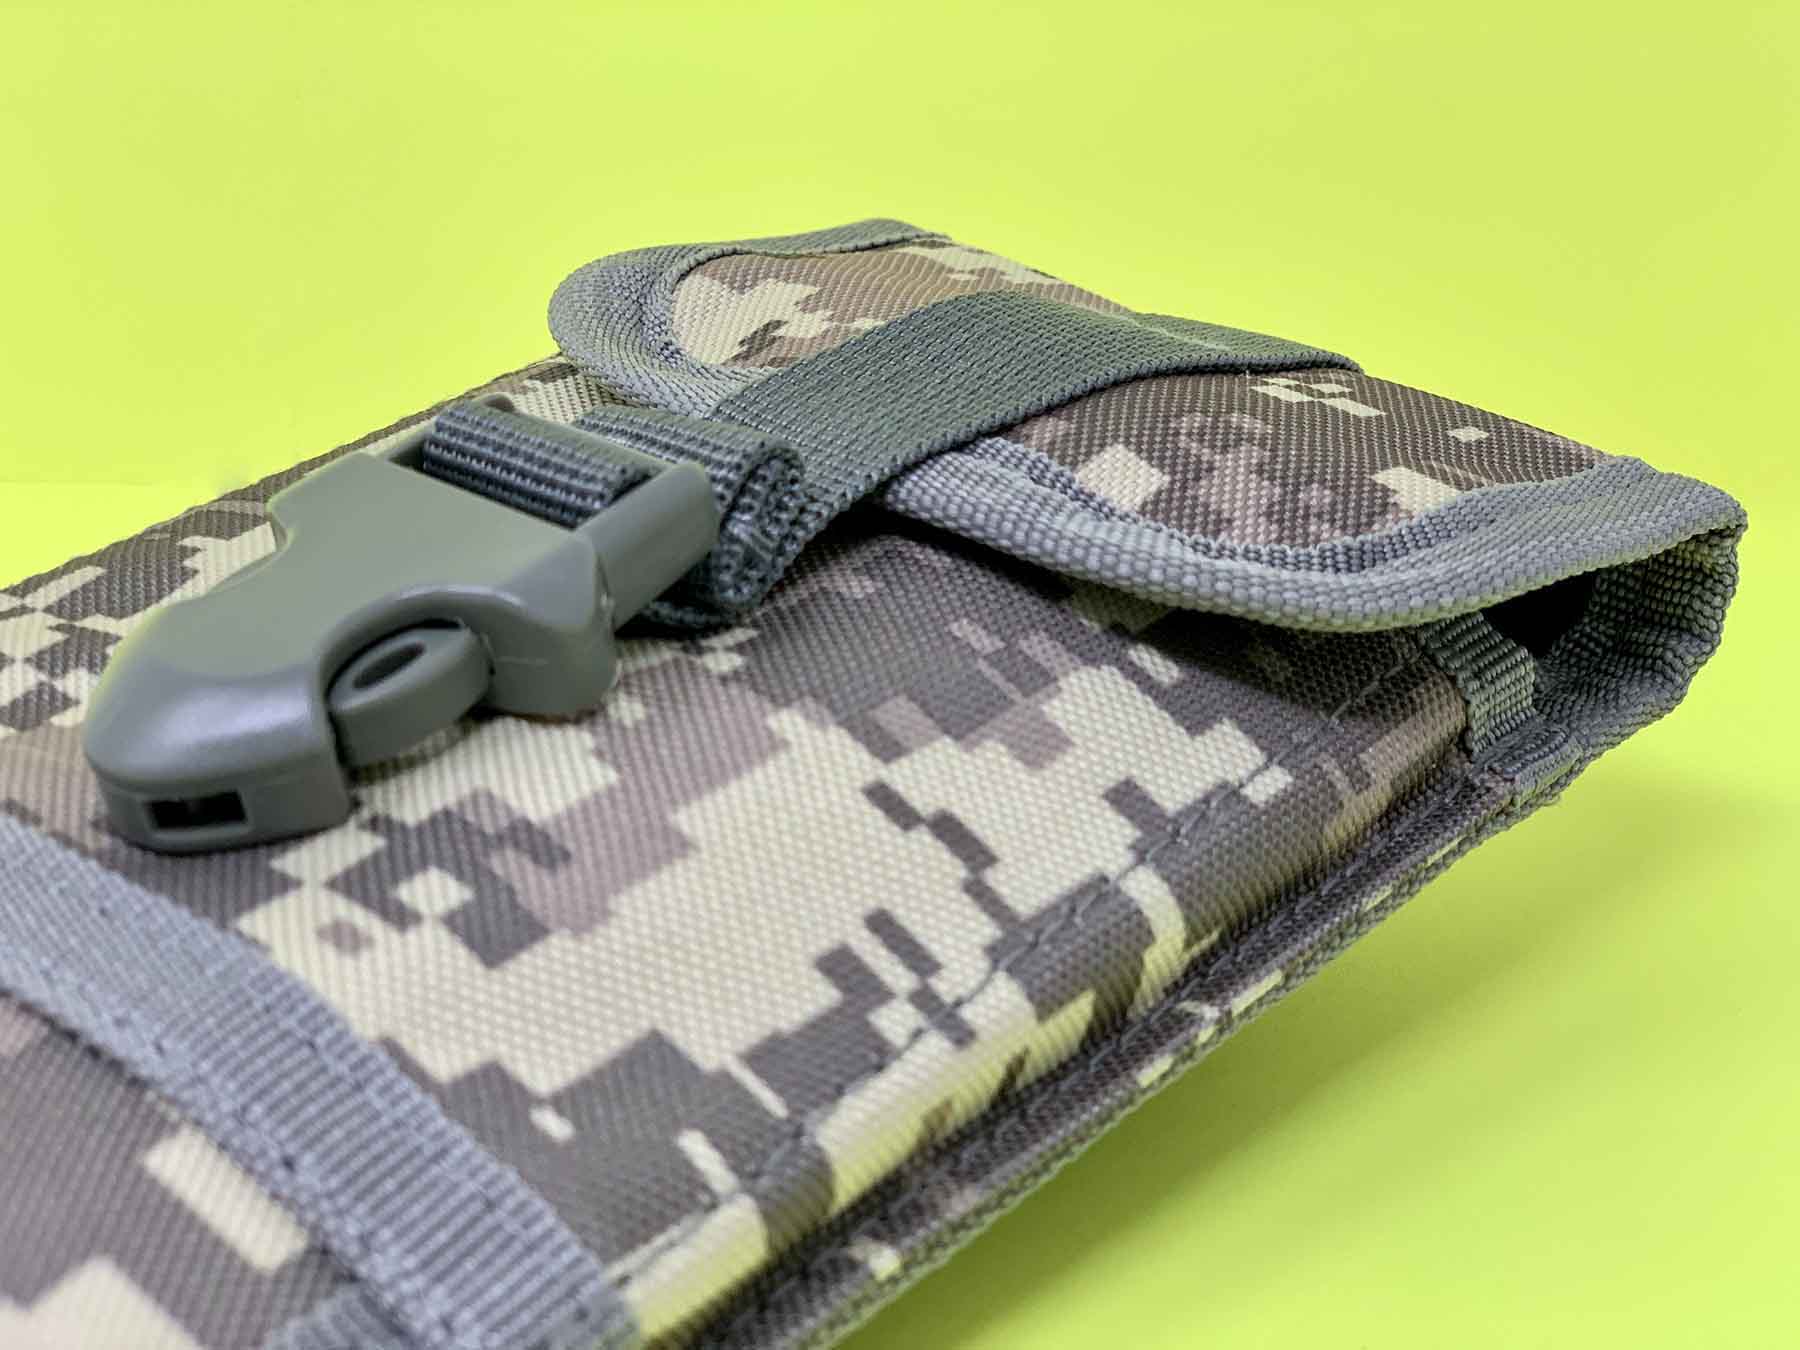 Molle Tactical Phone Case with Clip for LG